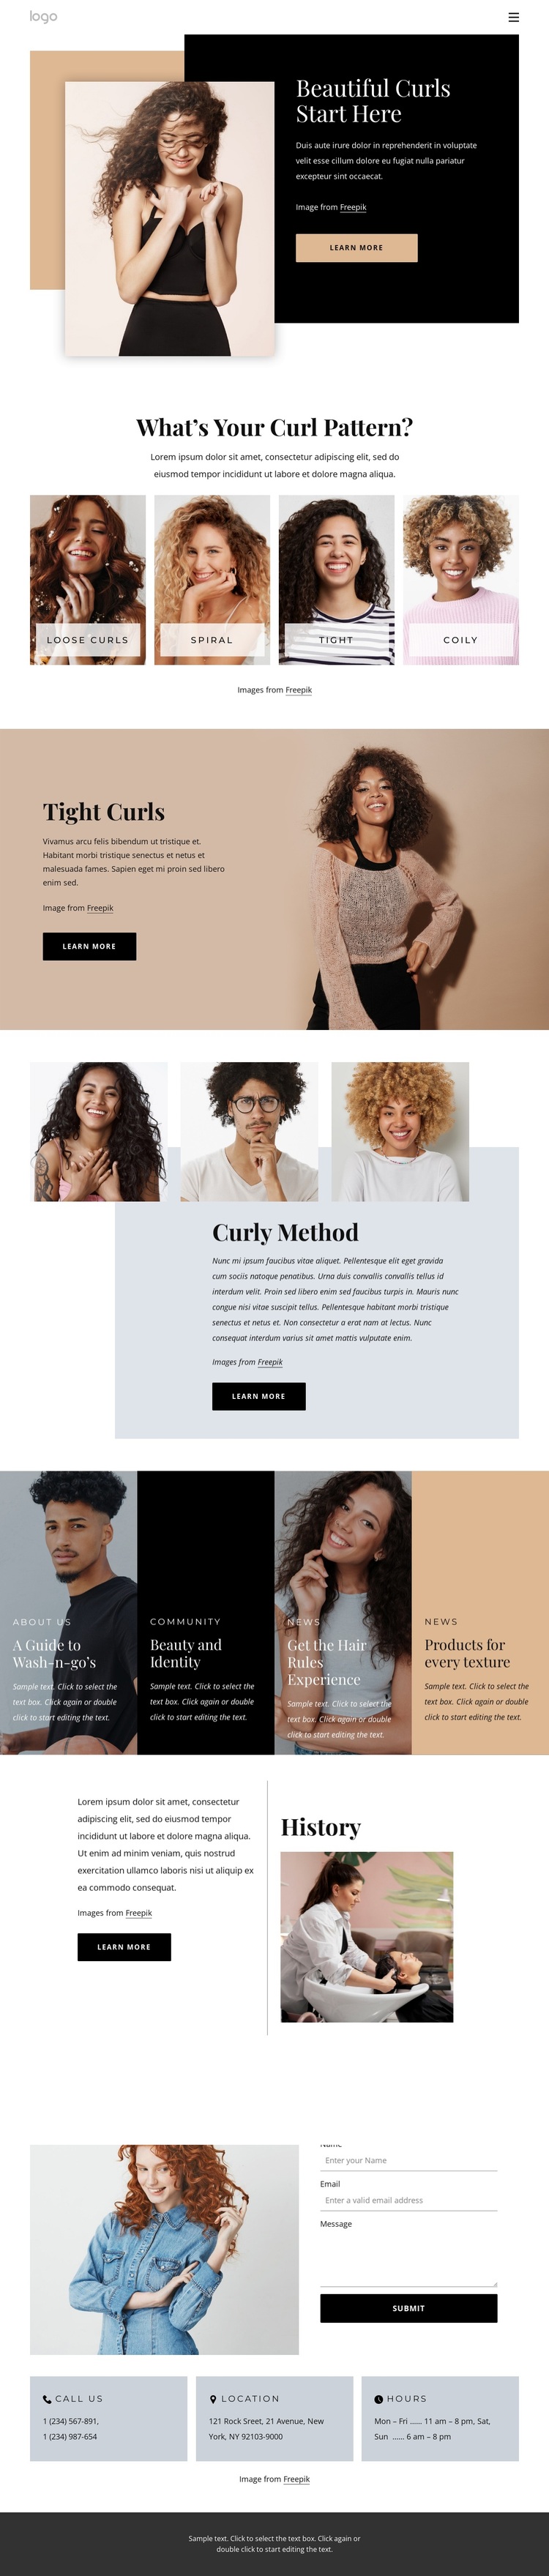 Bring out the best in your curls Joomla Page Builder